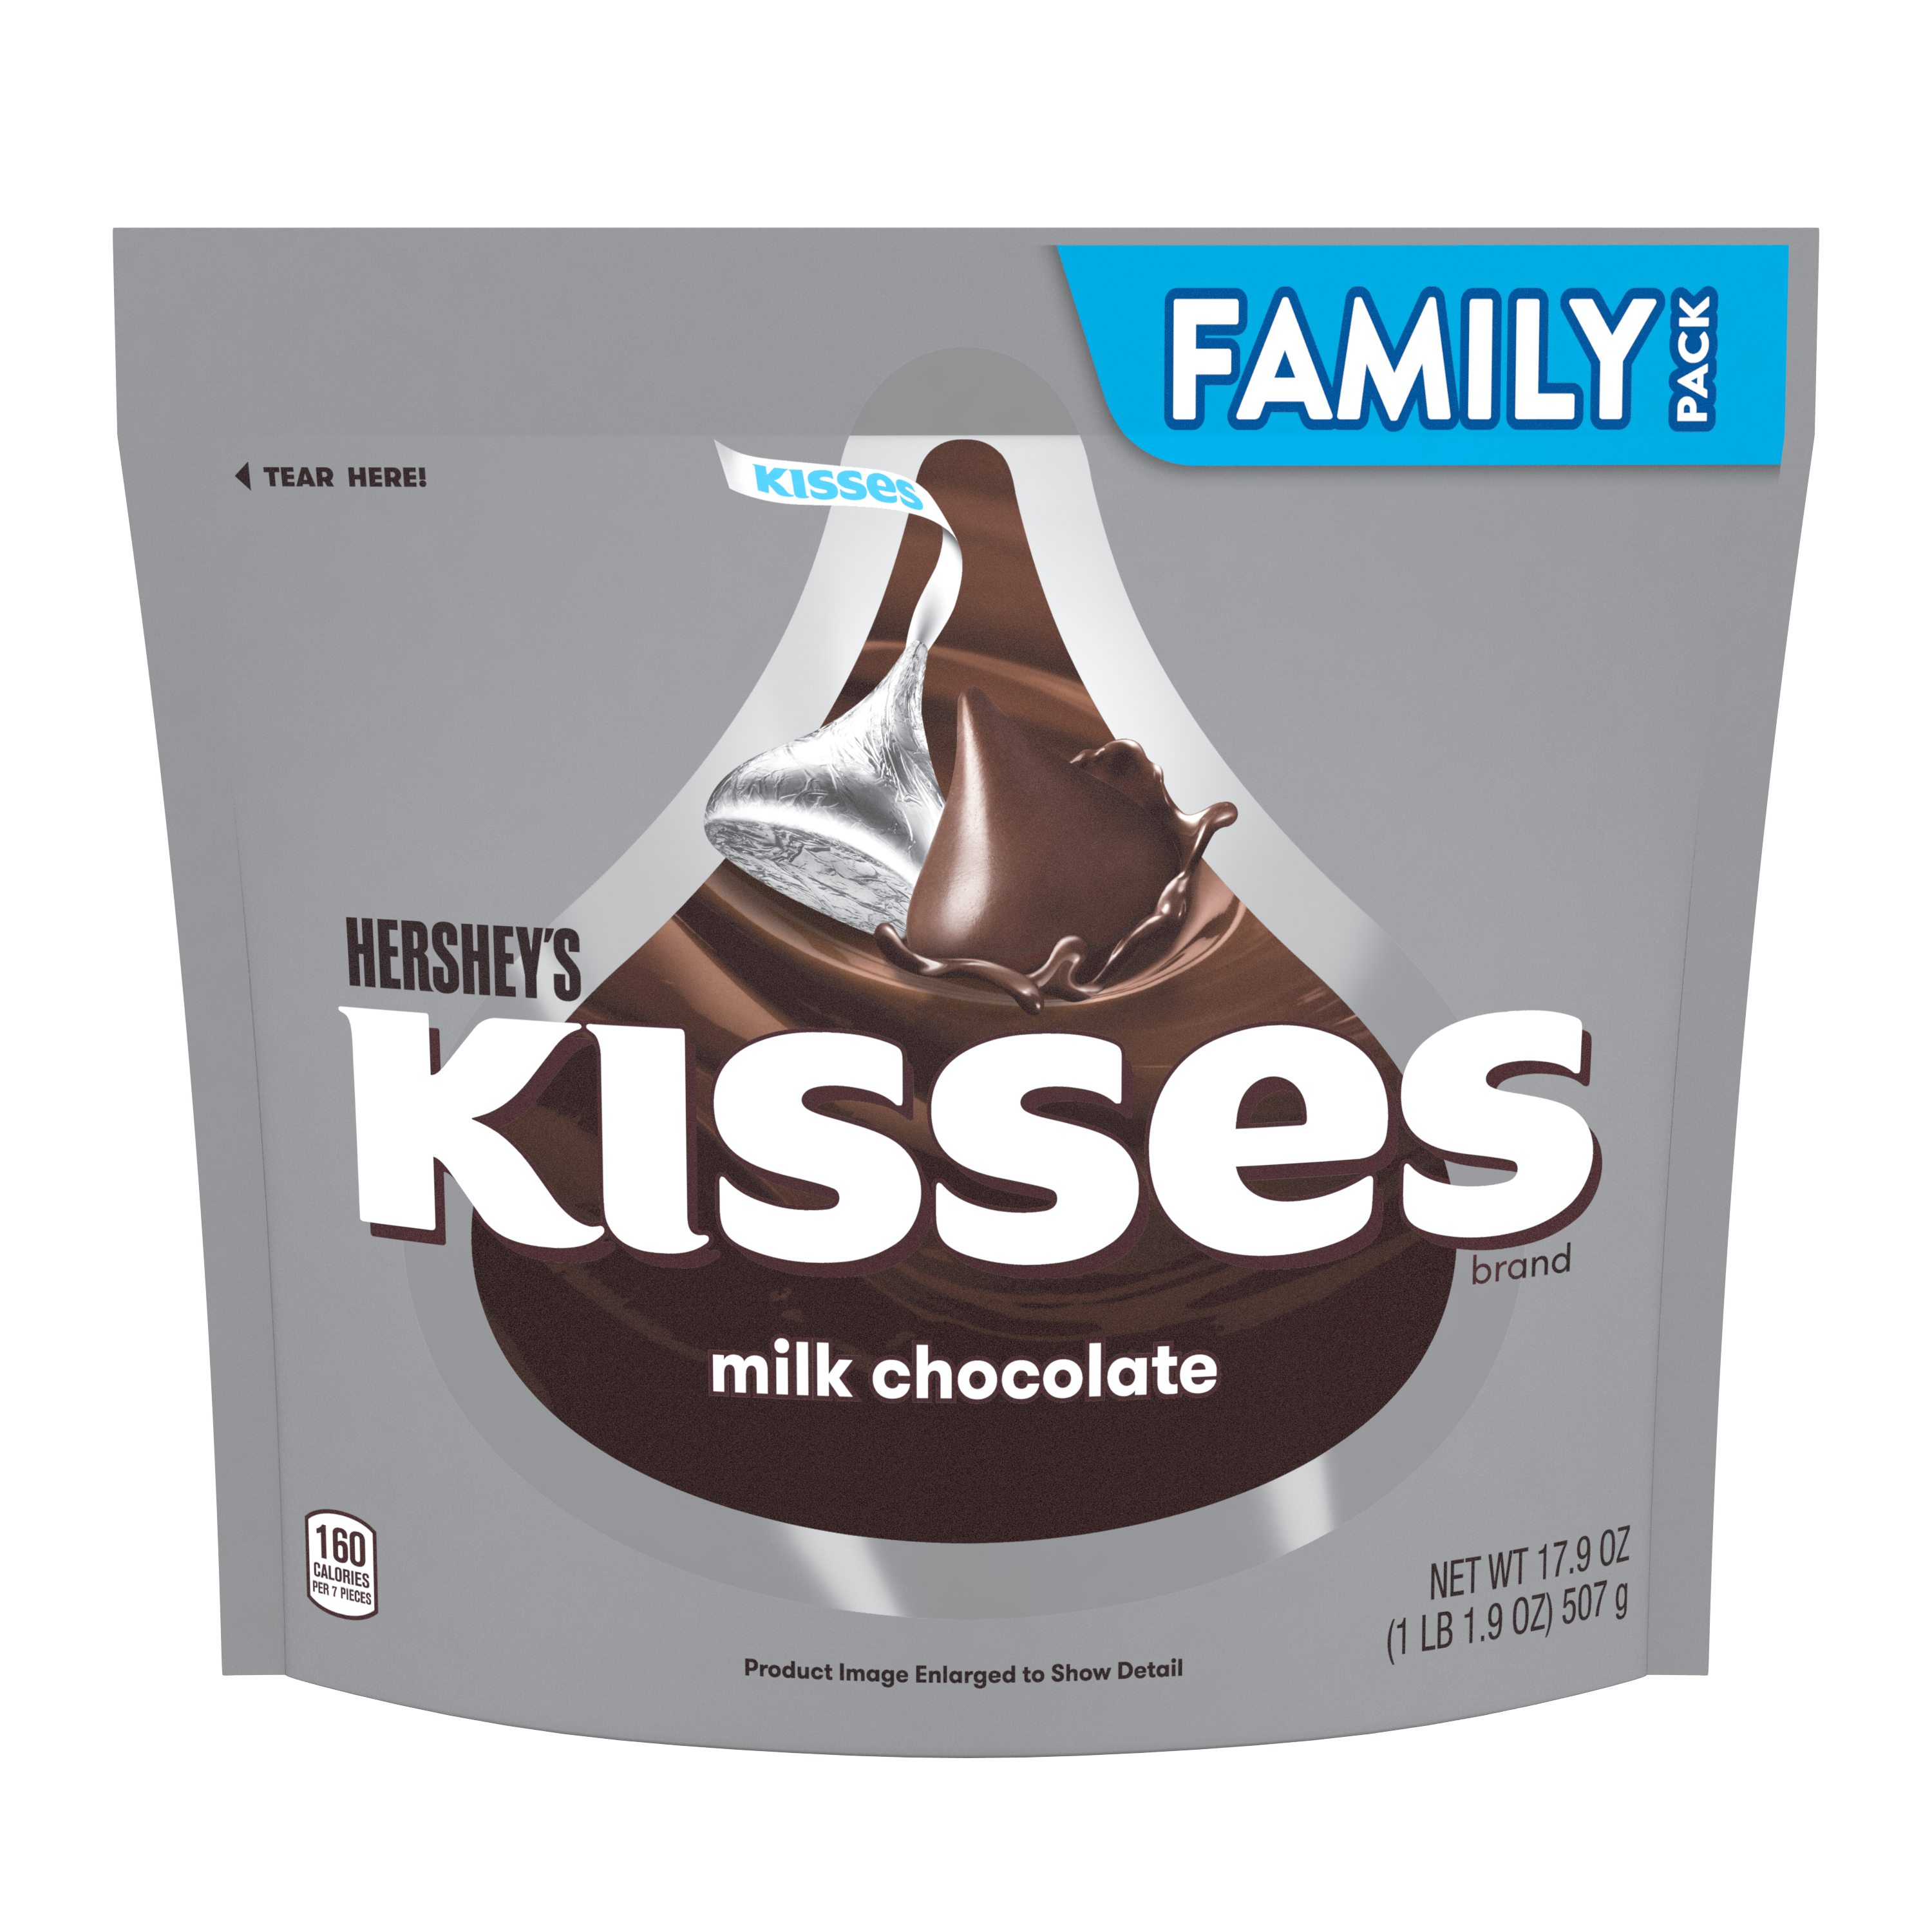 HERSHEY'S KISSES Milk Chocolate Candy, 17.9 oz pack - Front of Package